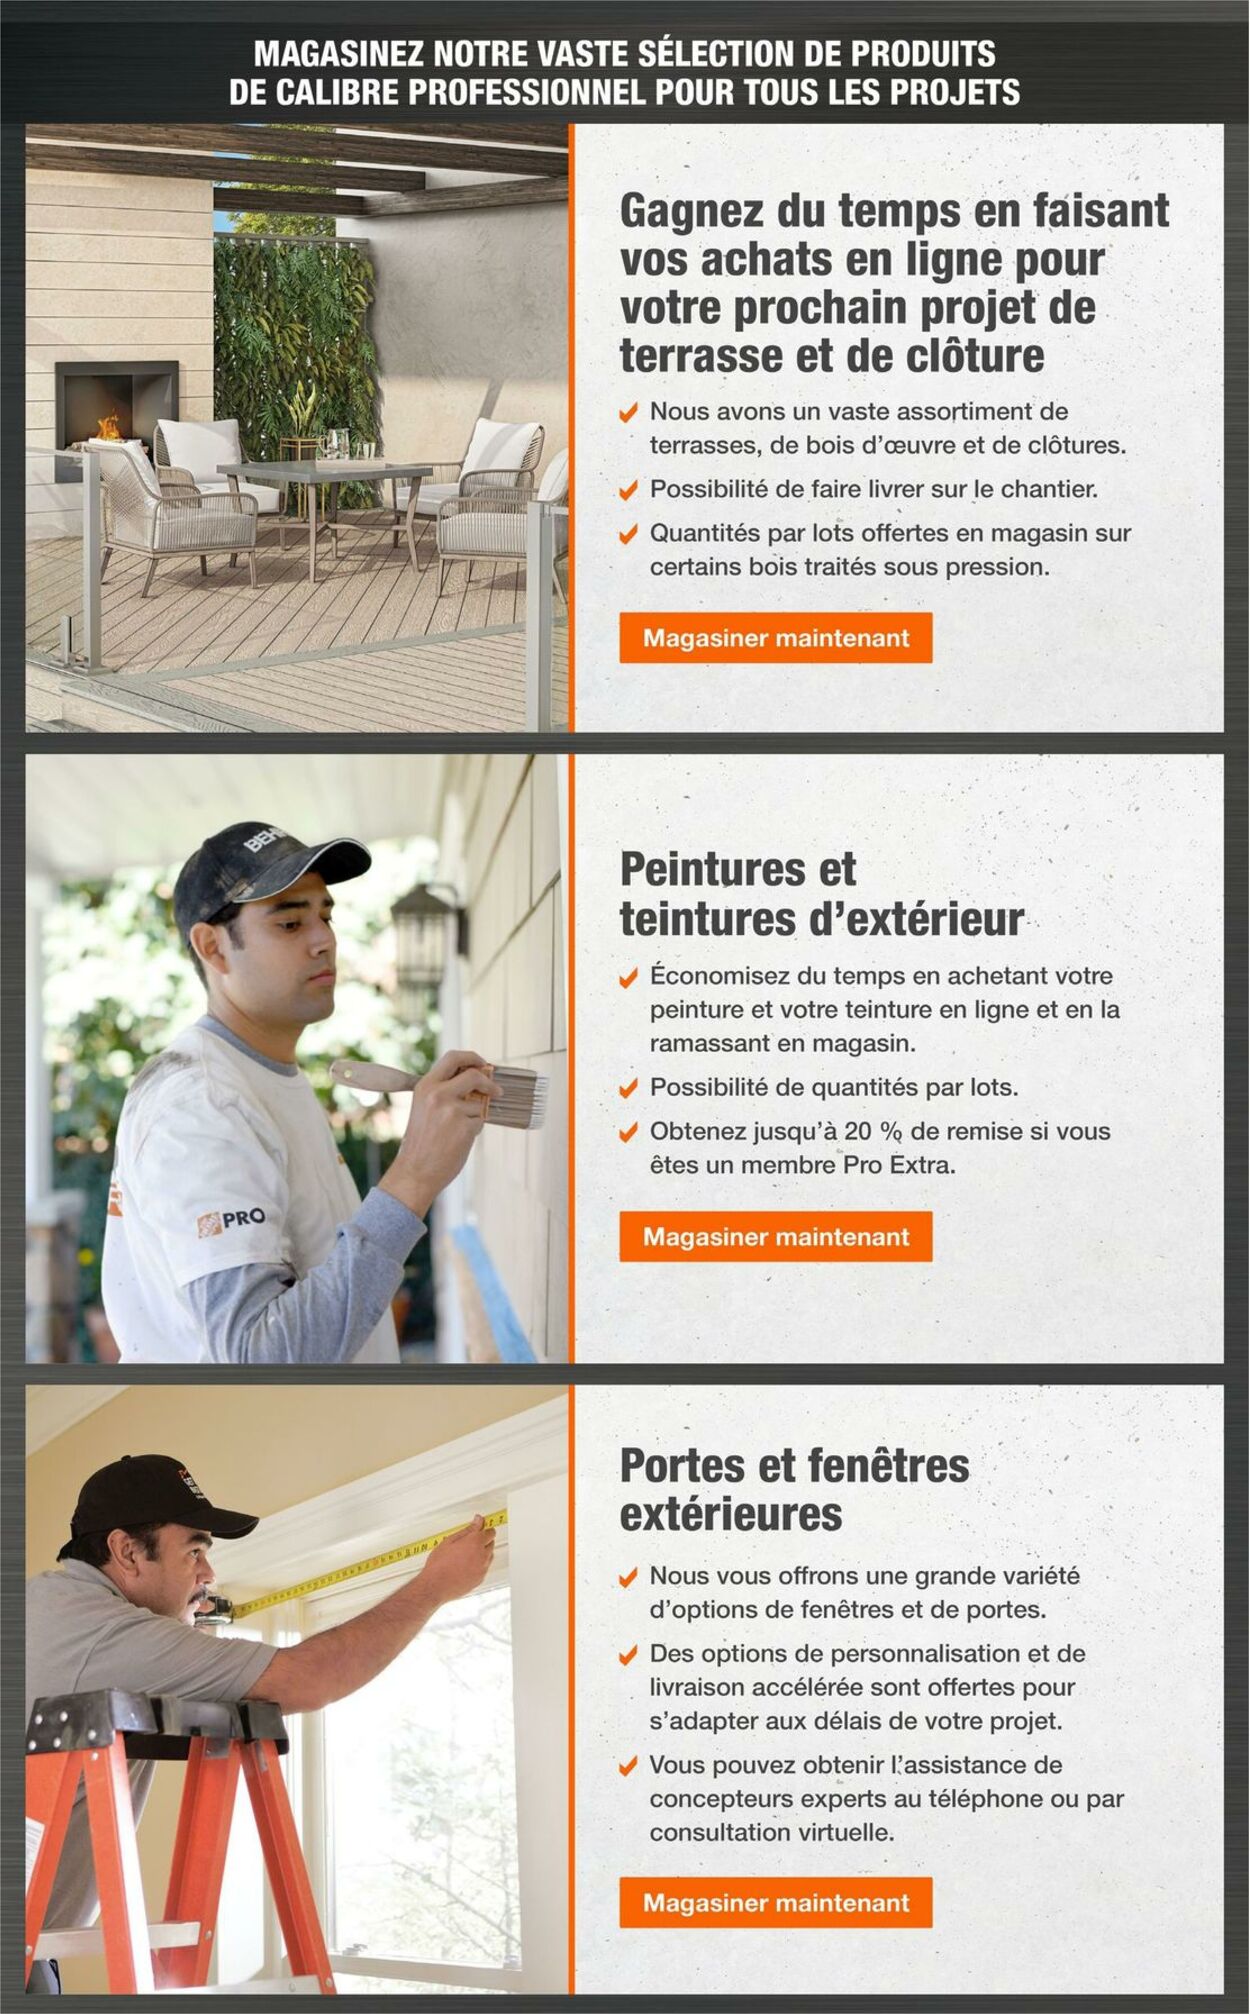 Circulaire Home Depot 01.09.2022 - 14.09.2022